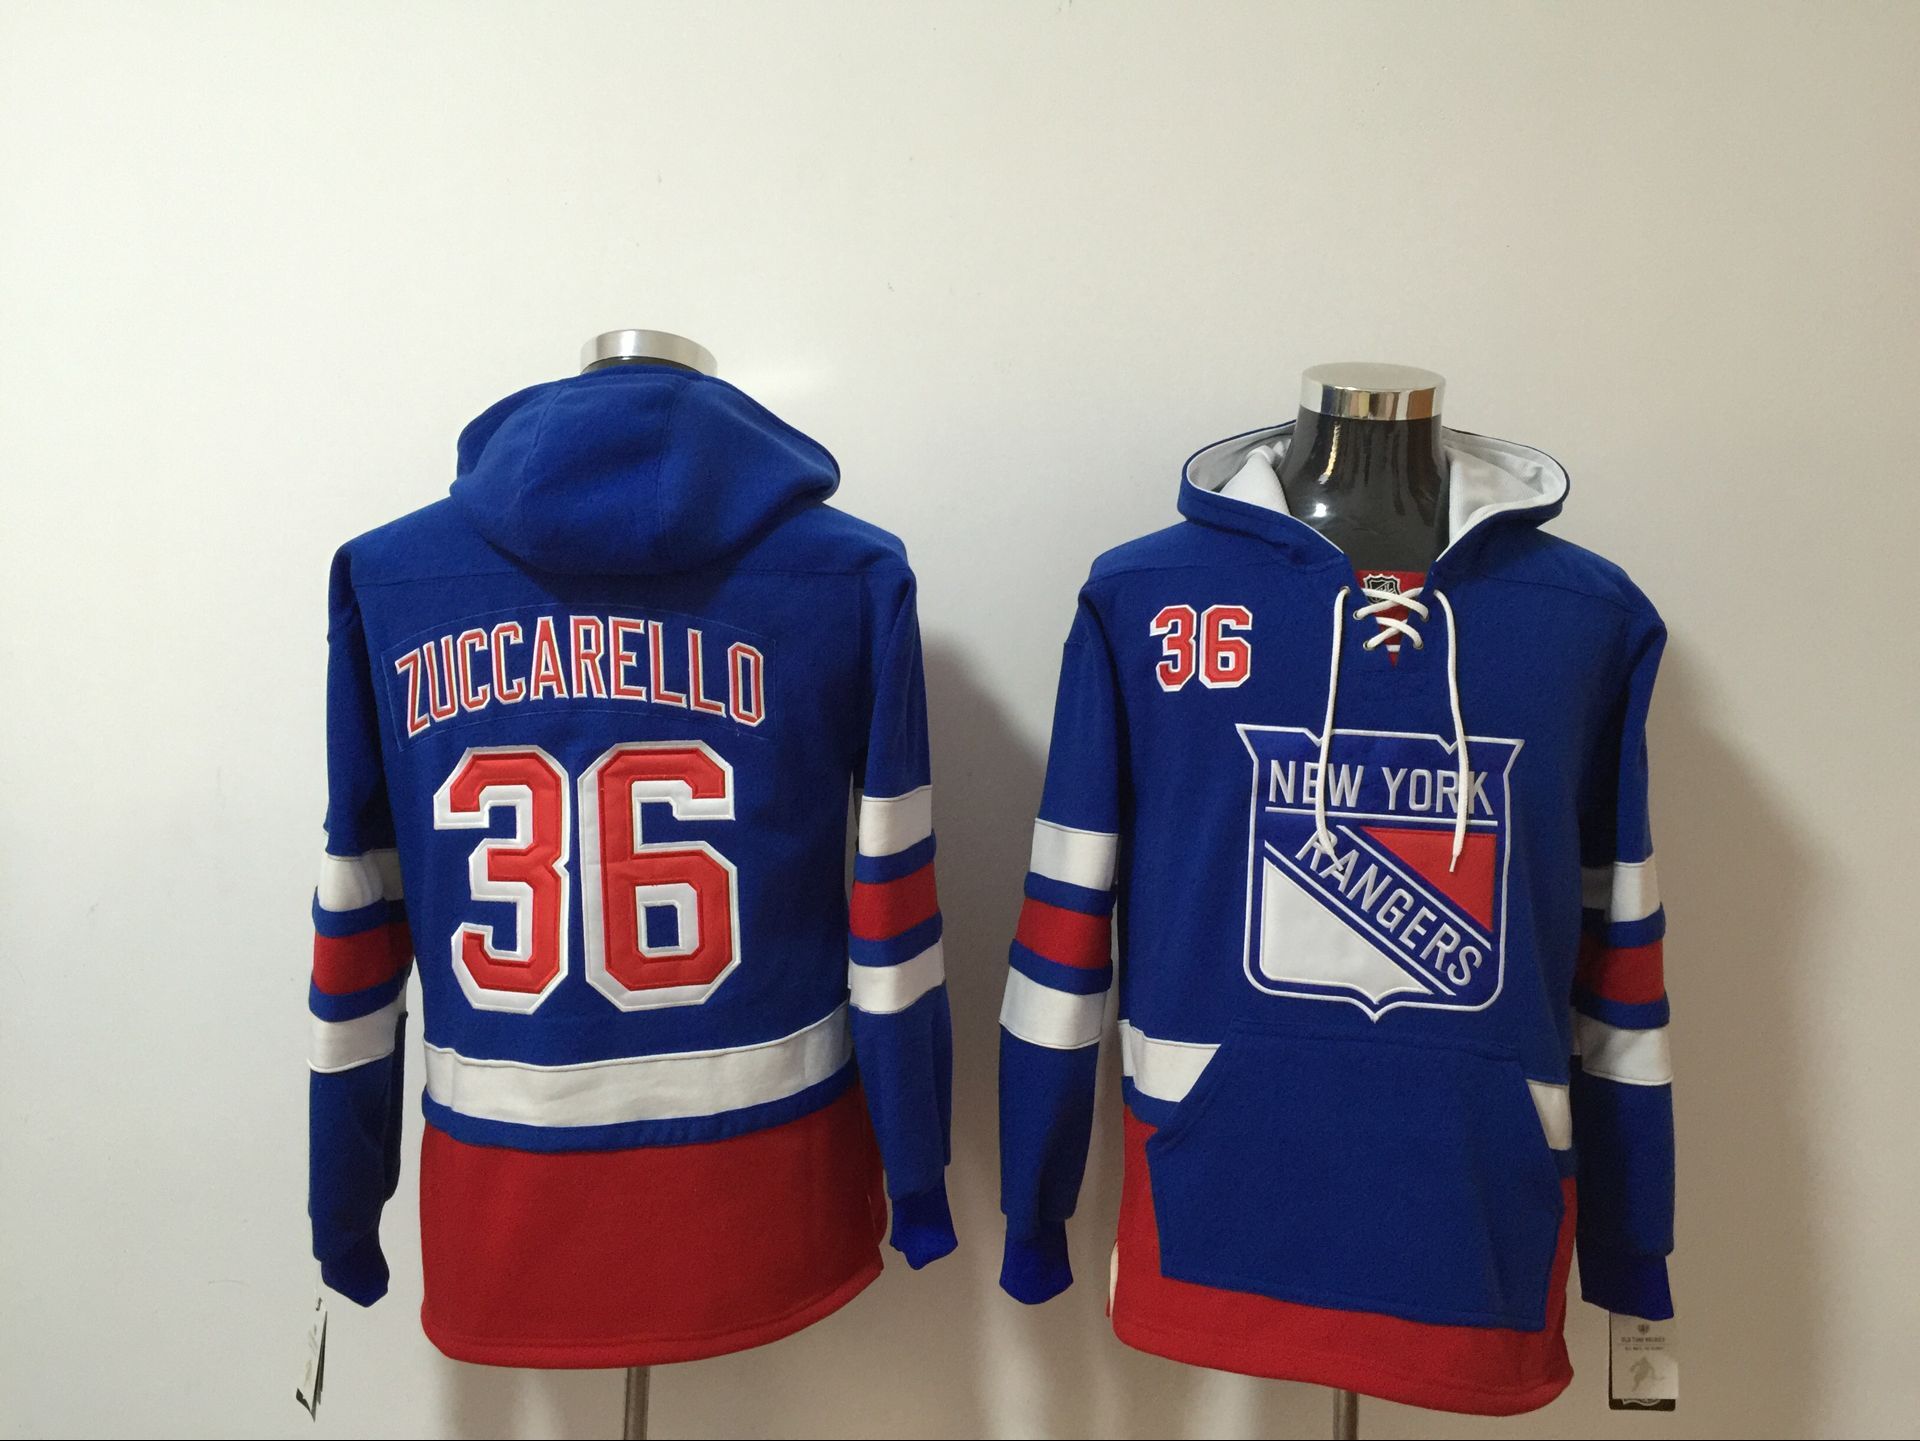 Rangers 36 Mats Zuccarello Royal All Stitched Hooded Sweatshirt